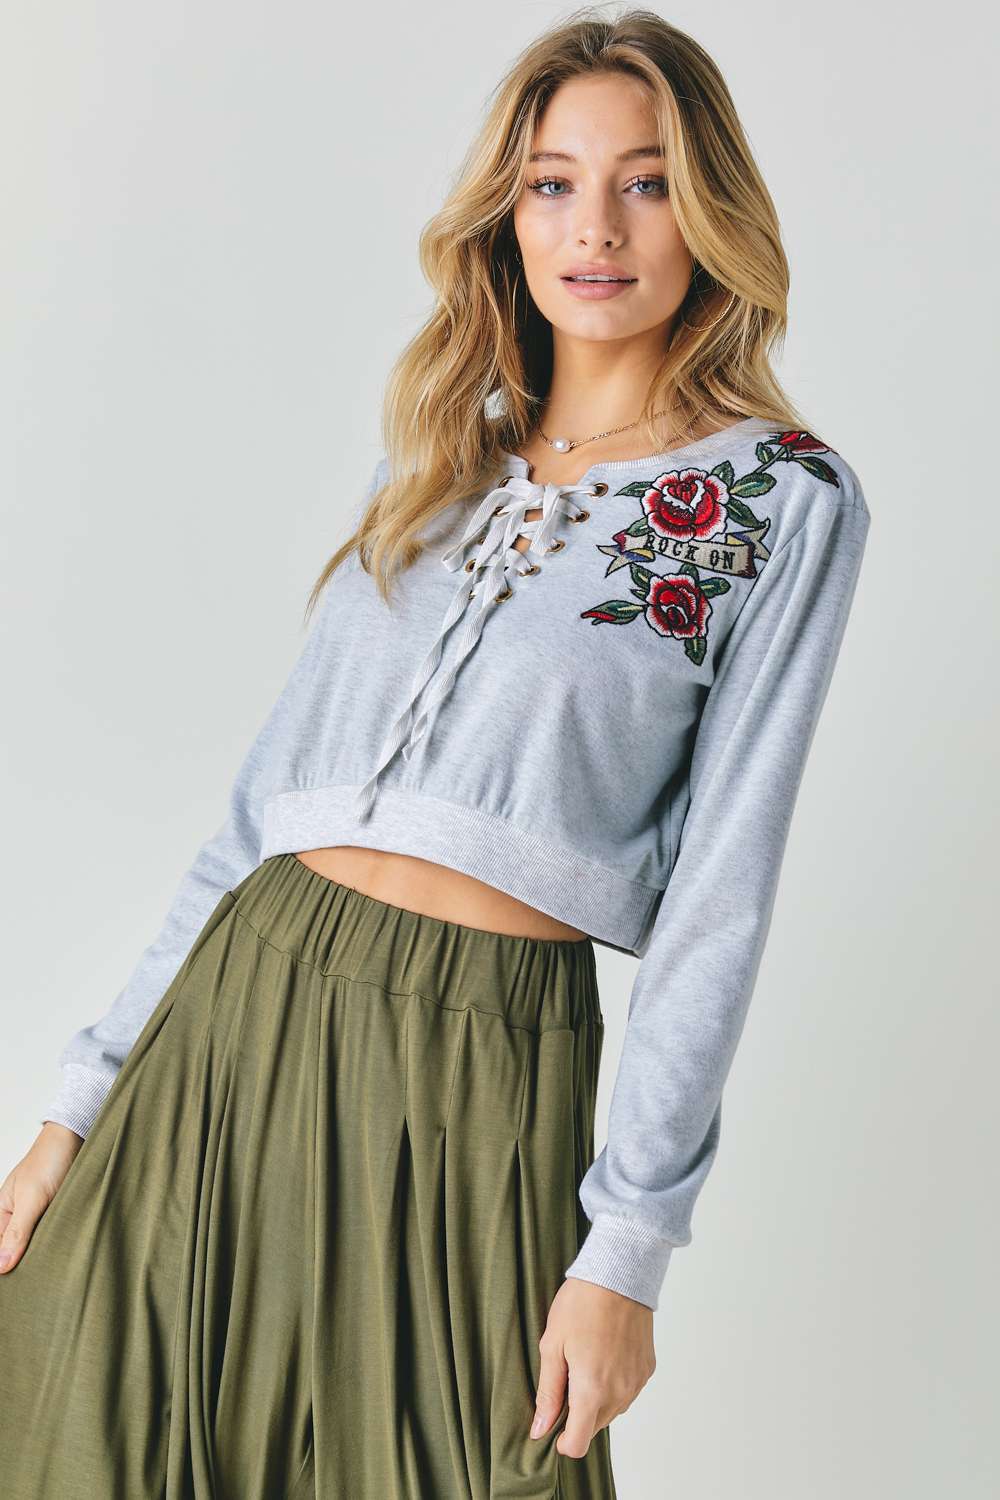 Floral Embroidered Cropped Sweatshirt Sunny EvE Fashion